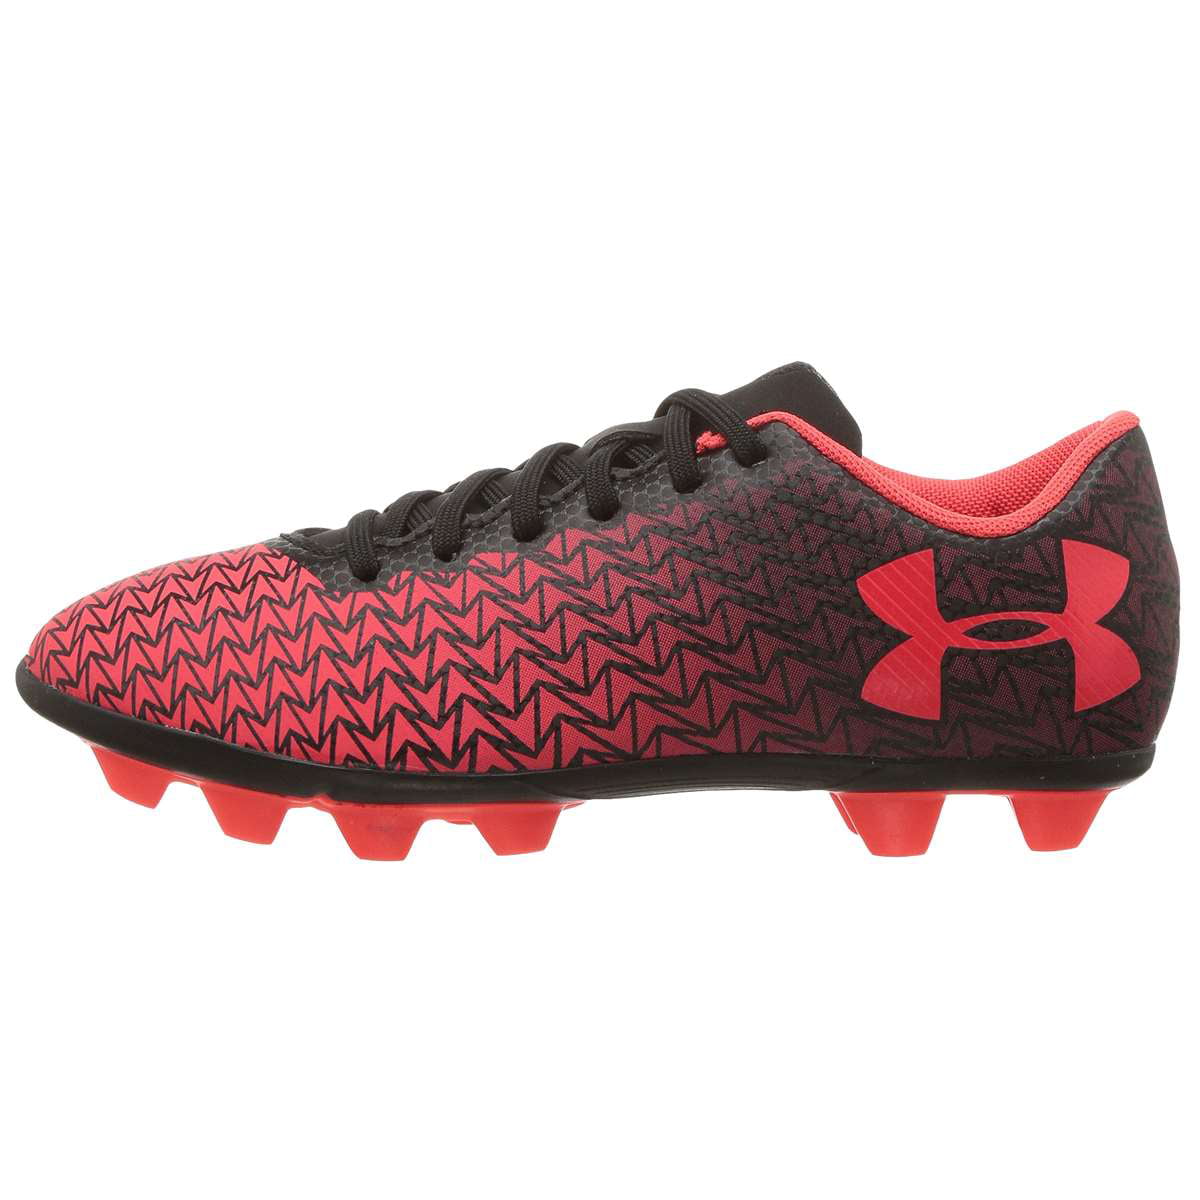 Under Armour FLASH FG moulded junior football boots bright green 